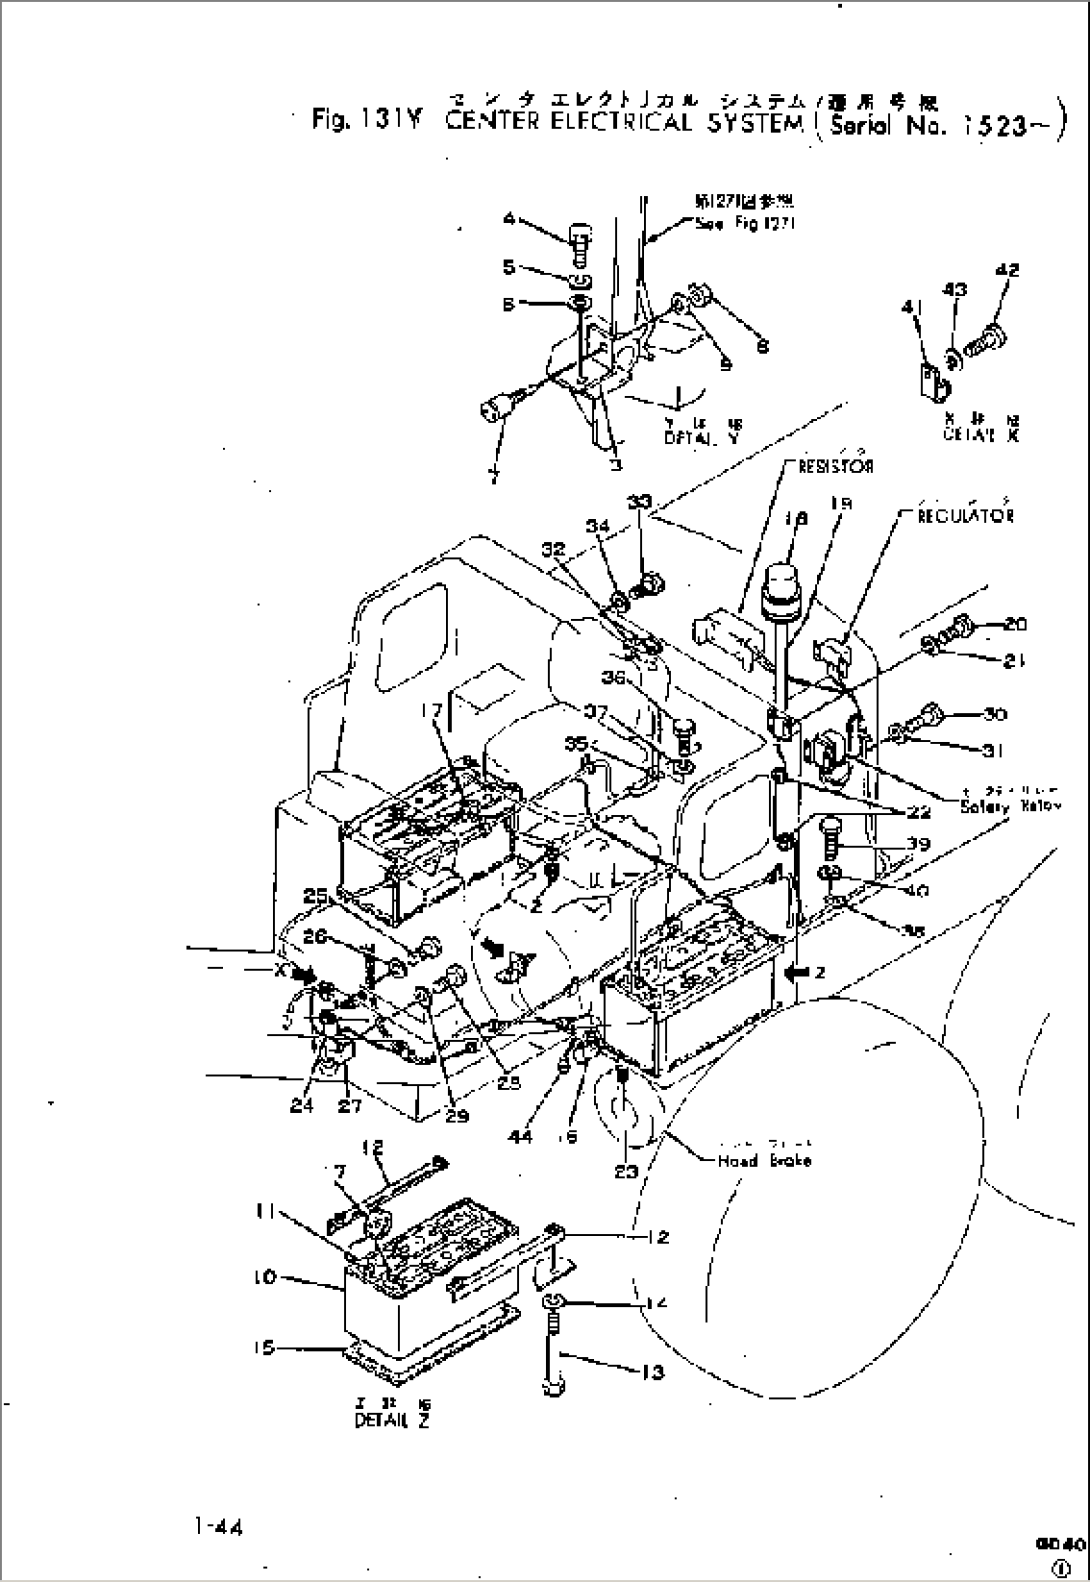 CENTER ELECTRICAL SYSTEM(#1523-)